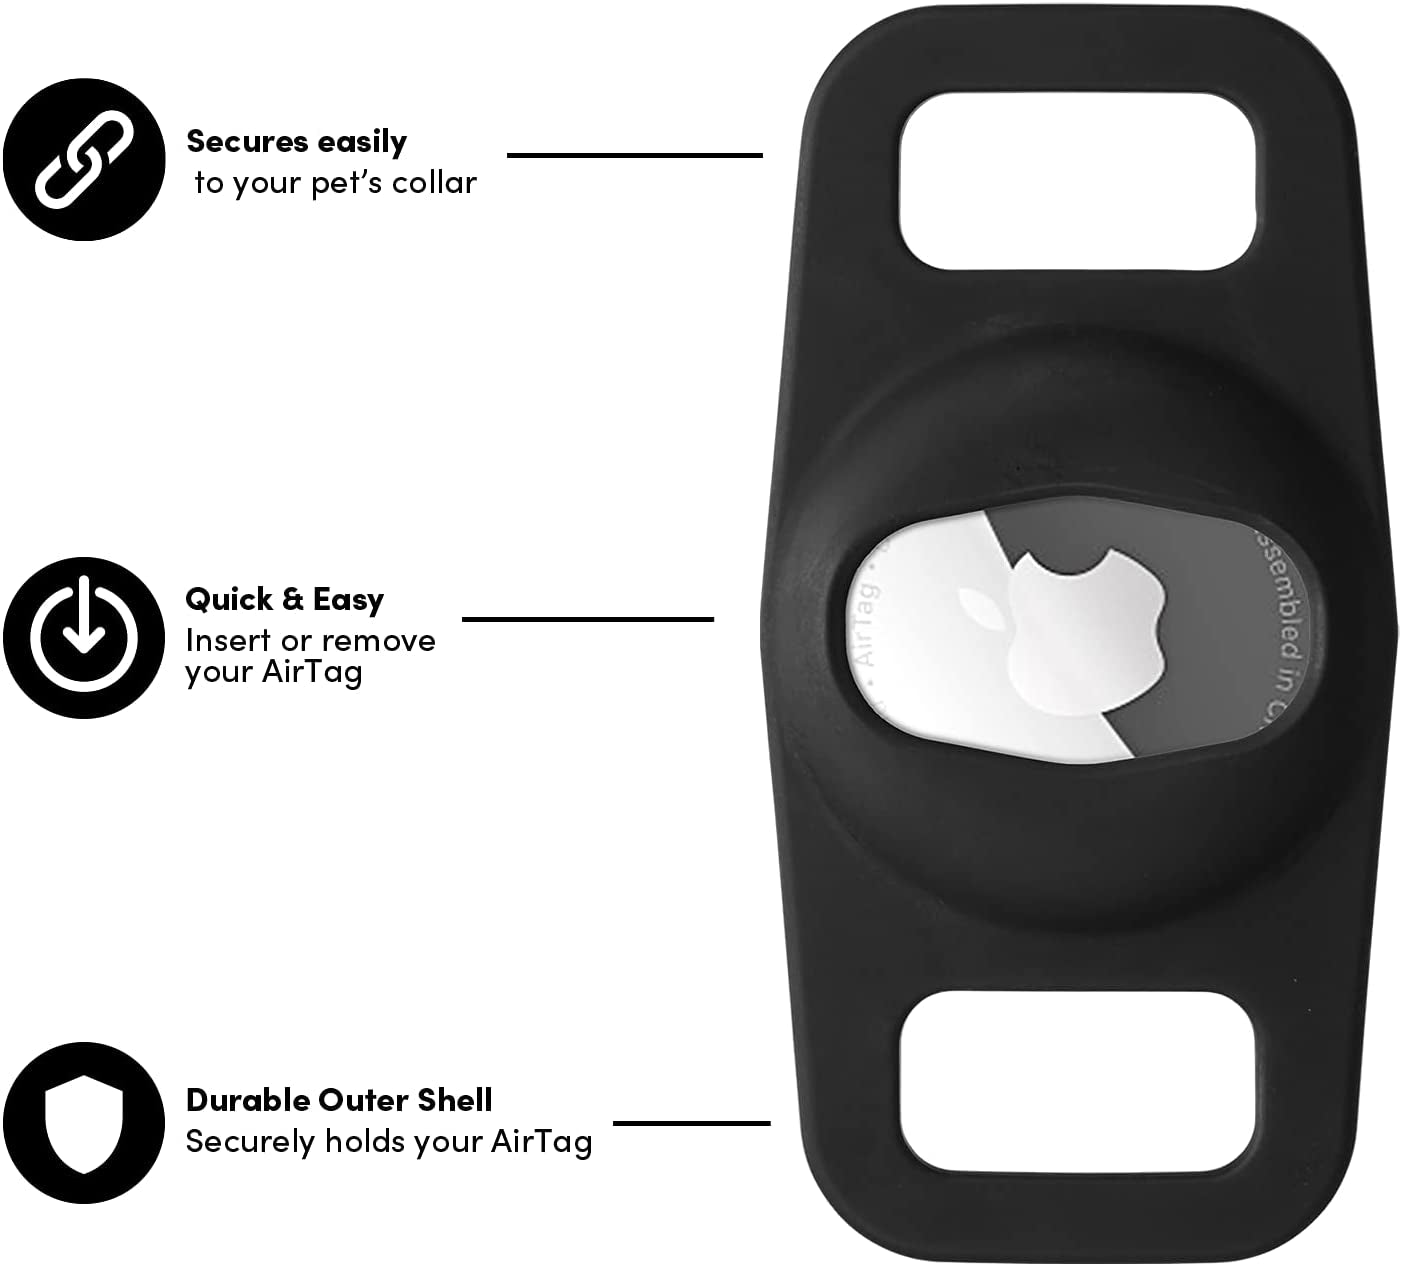 Case-Mate Protective Airtag Case for Dog Collar, Anti-Lost Airtag Loop for Dog GPS Tracker, Airtag Case Compatible with Cat/Dog Collar, (Black) Electronics > GPS Accessories > GPS Cases Case-Mate   